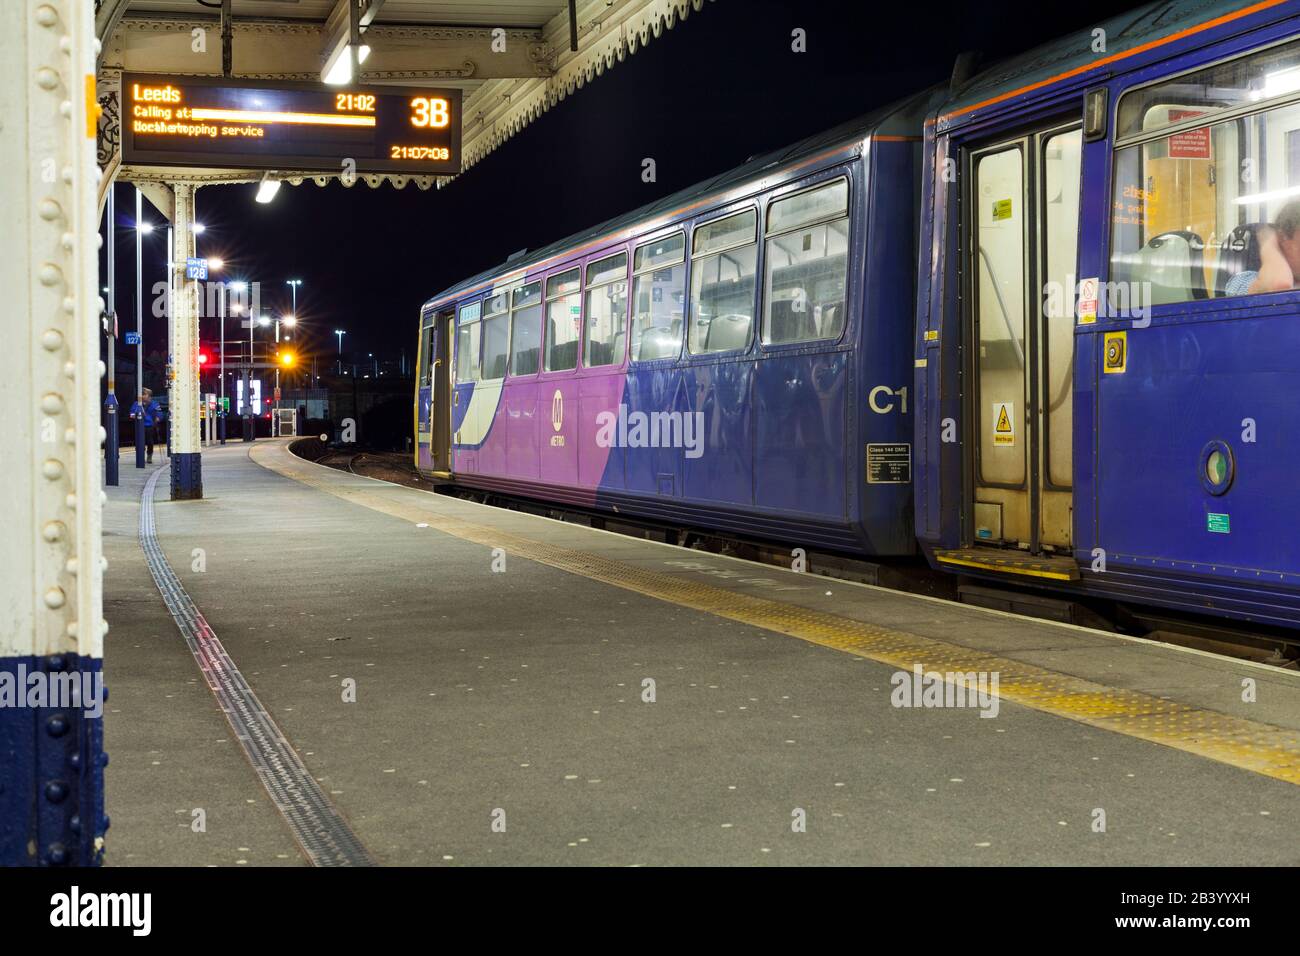 Northern rail class 144 pacer train 144006 at Sheffield railway station waiting to depart Stock Photo